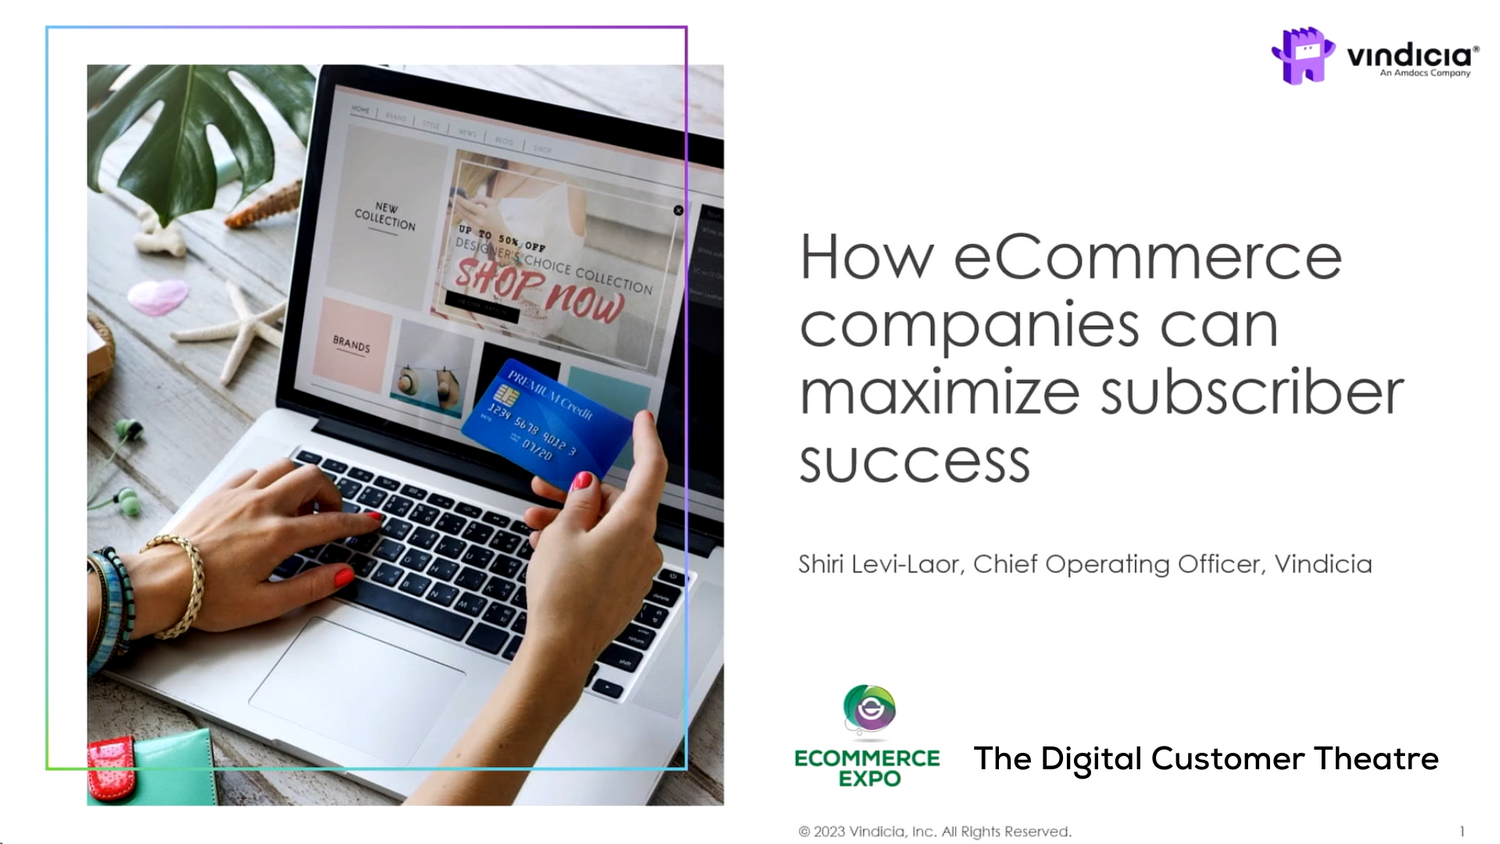 How eCommerce companies can maximize subscriber success